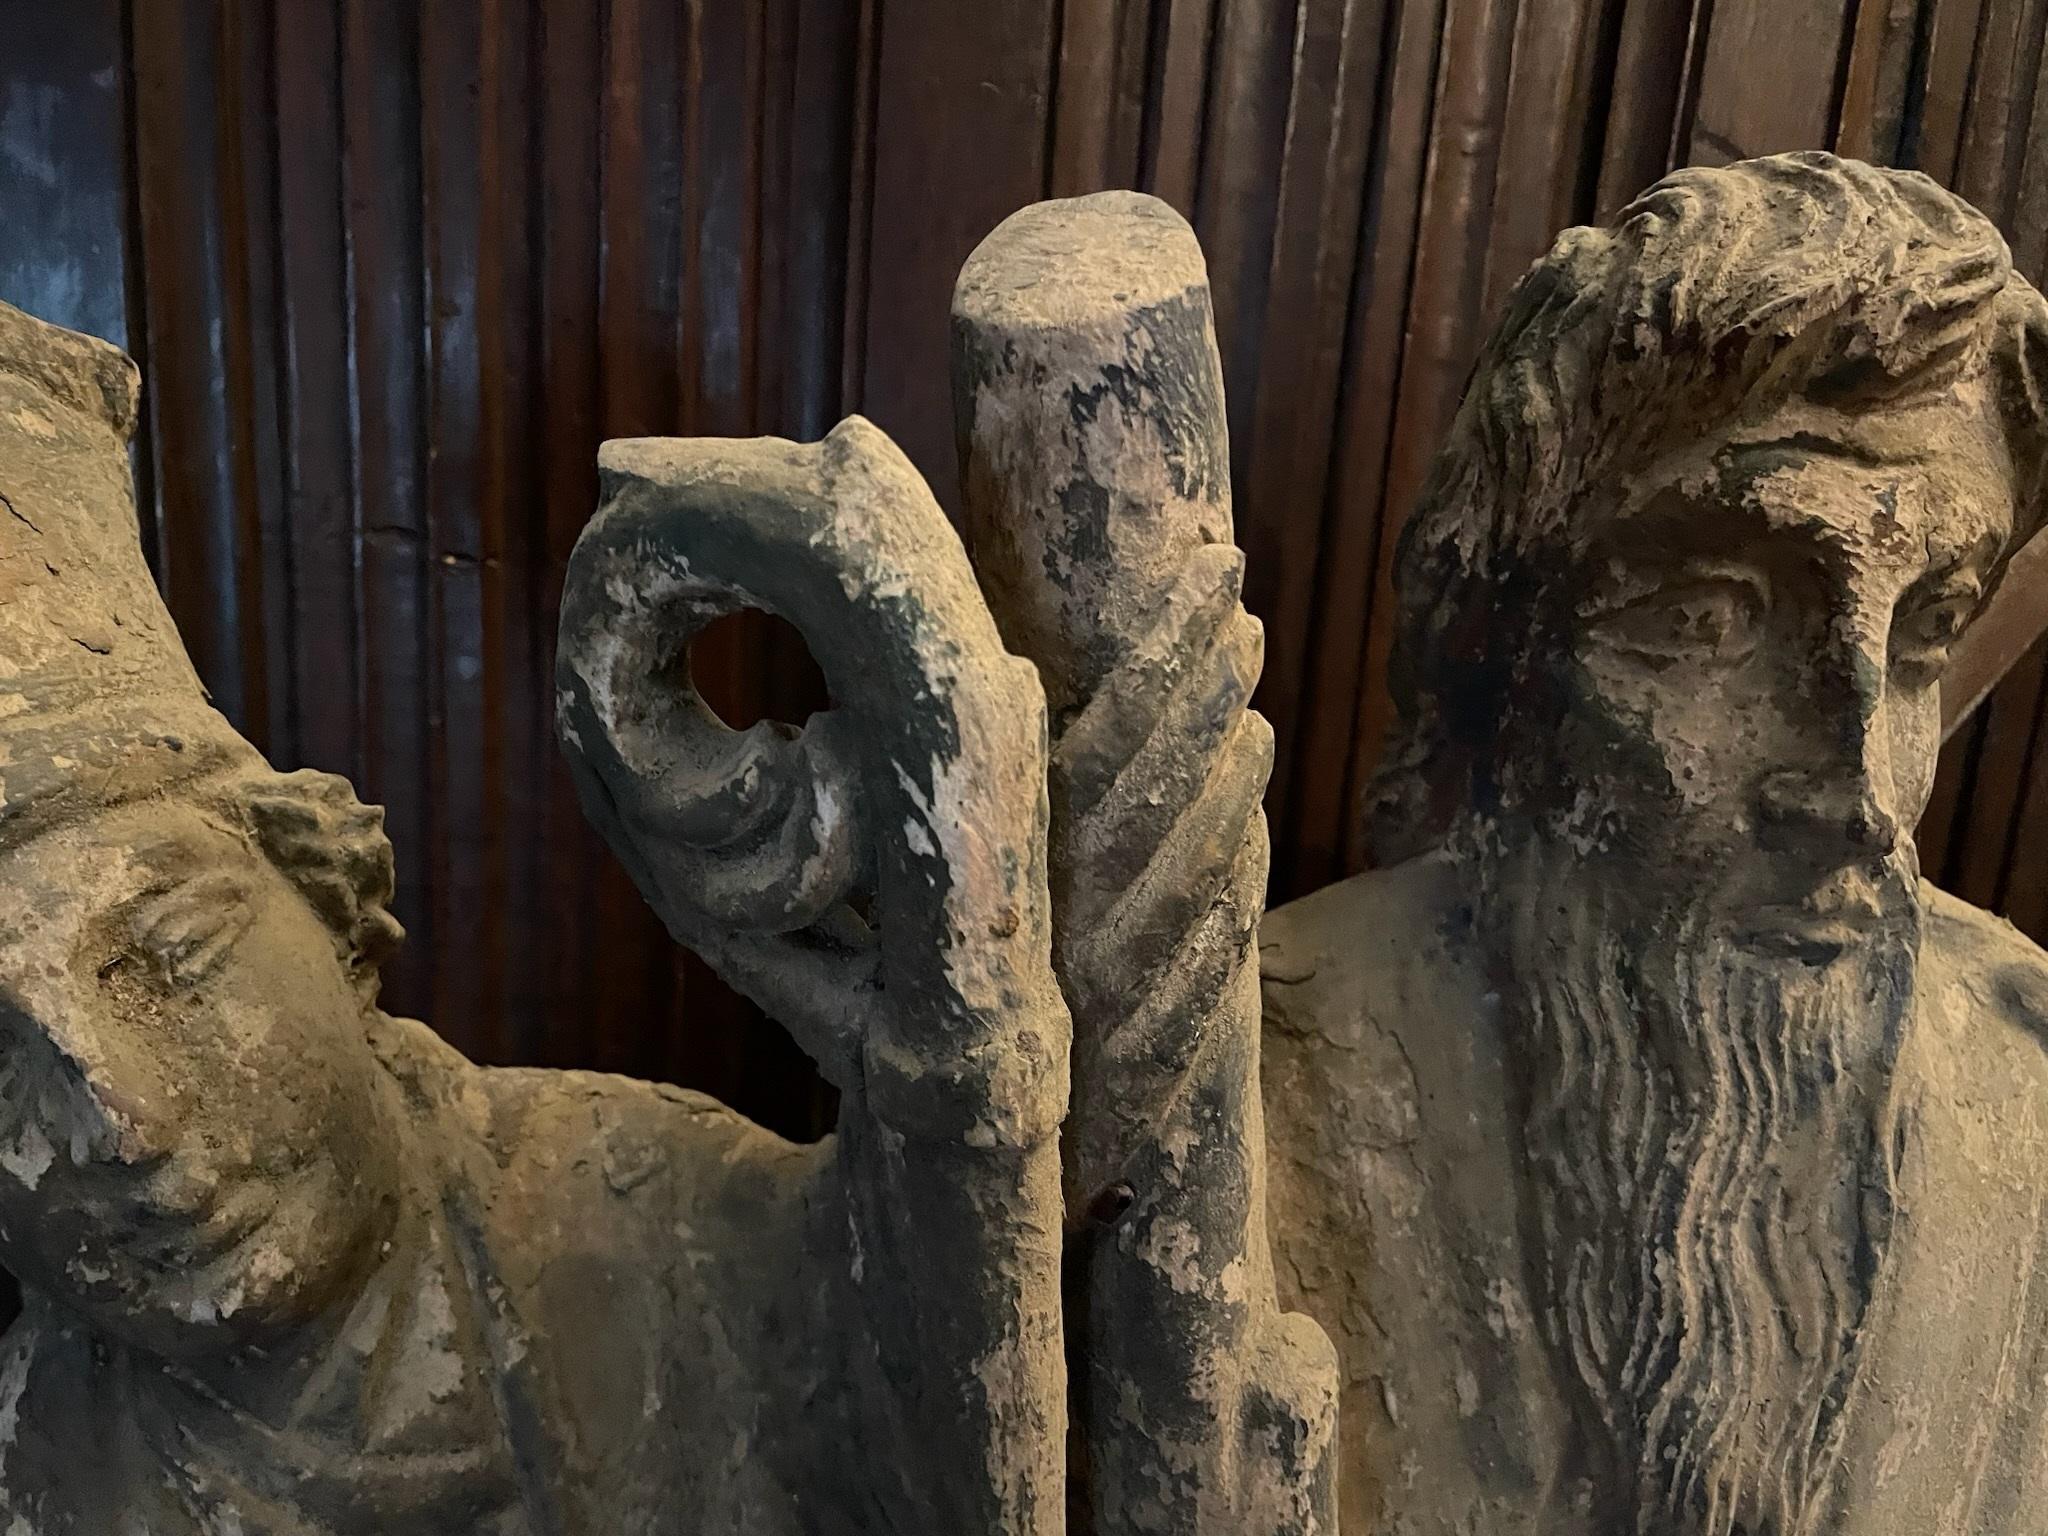 Medieval Style Carved Statue of 3 Religious Figures - Brown Figurative Sculpture by Unknown